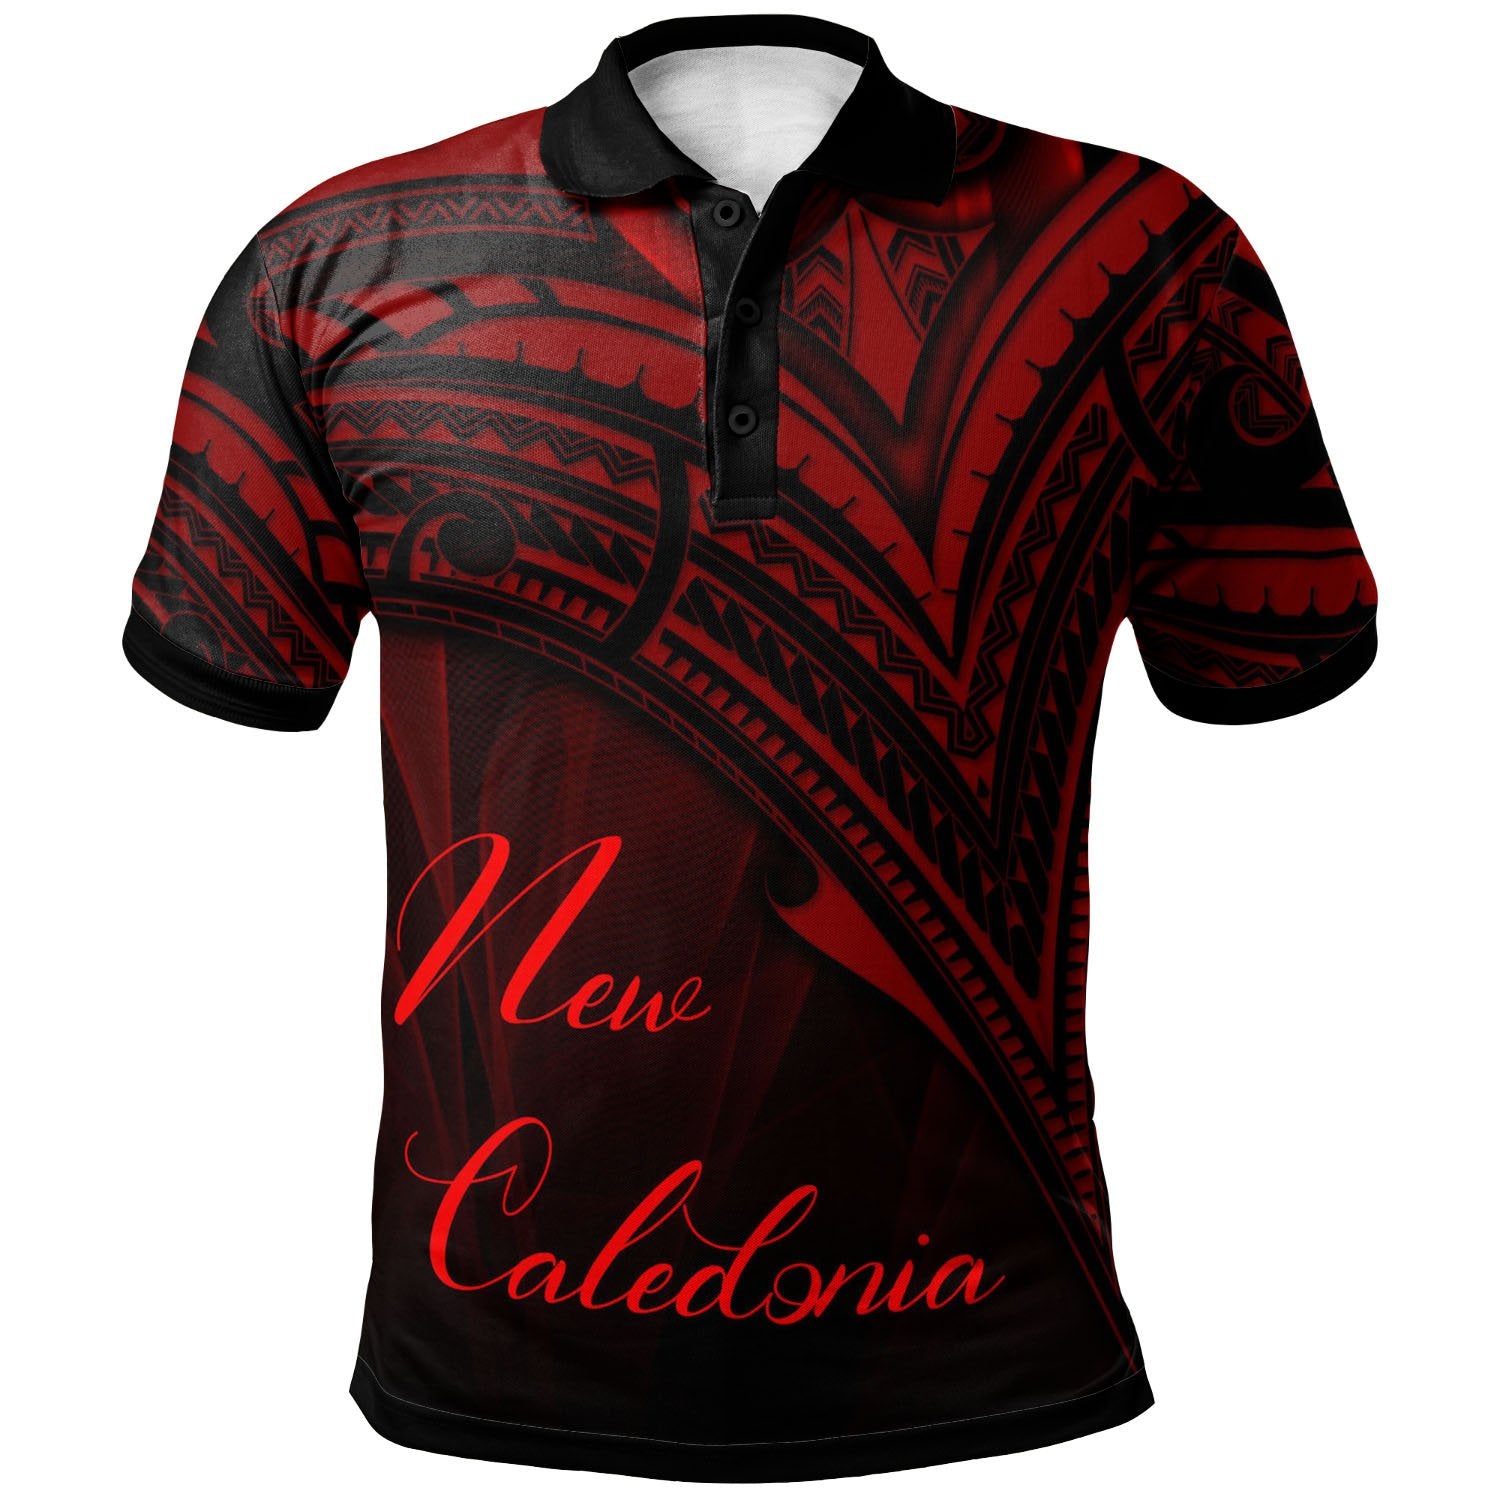 New Caledonia Polo Shirt Red Color Cross Style Unisex Black - Polynesian Pride